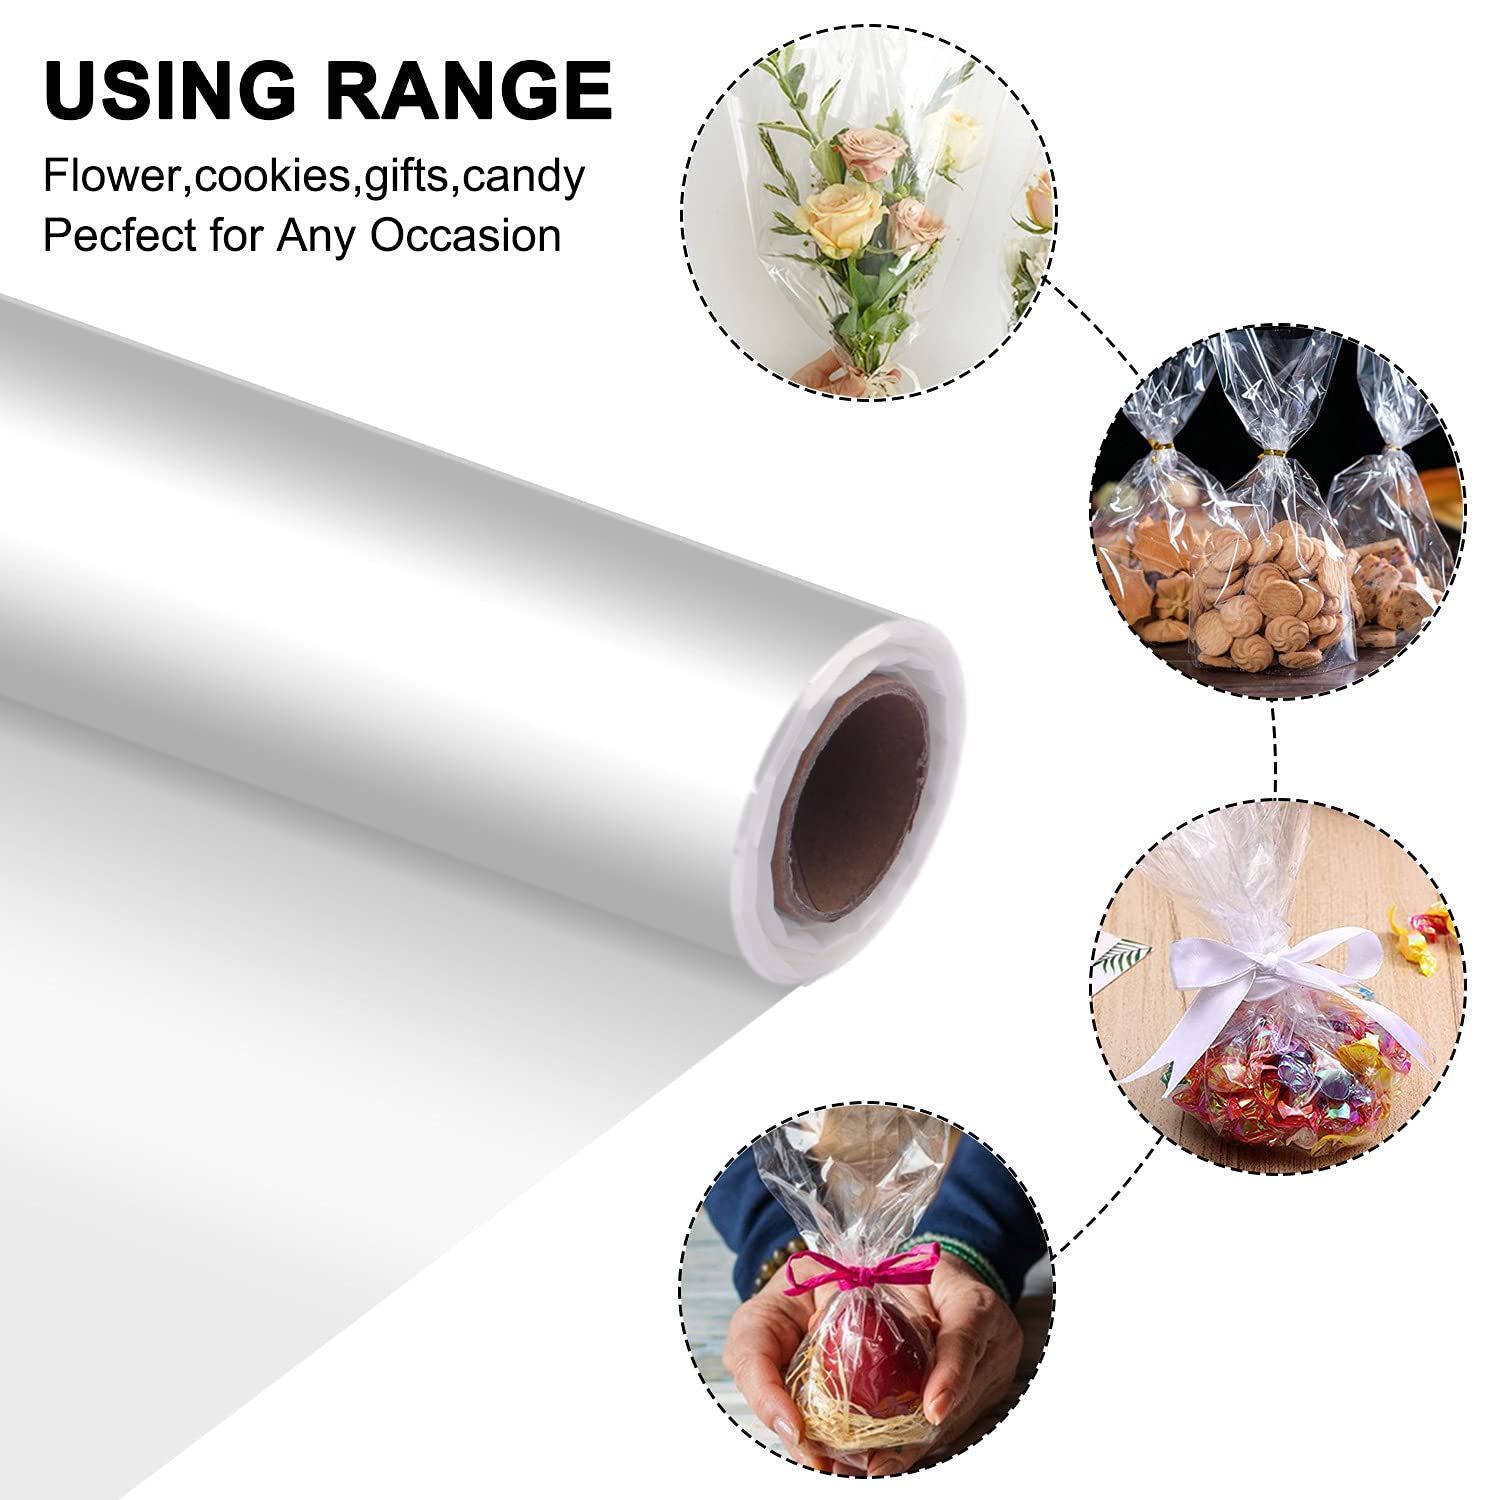 MAOUYWIEE 1 Roll Clear Cellophane Wrap Roll 33'' x 115' Ft, 3 Mil Thick Clear Cellophane Wrapping Paper | Wrap Roll | Cellophane Roll | Cellophane Wrap for Gifts, Baskets, Flowers